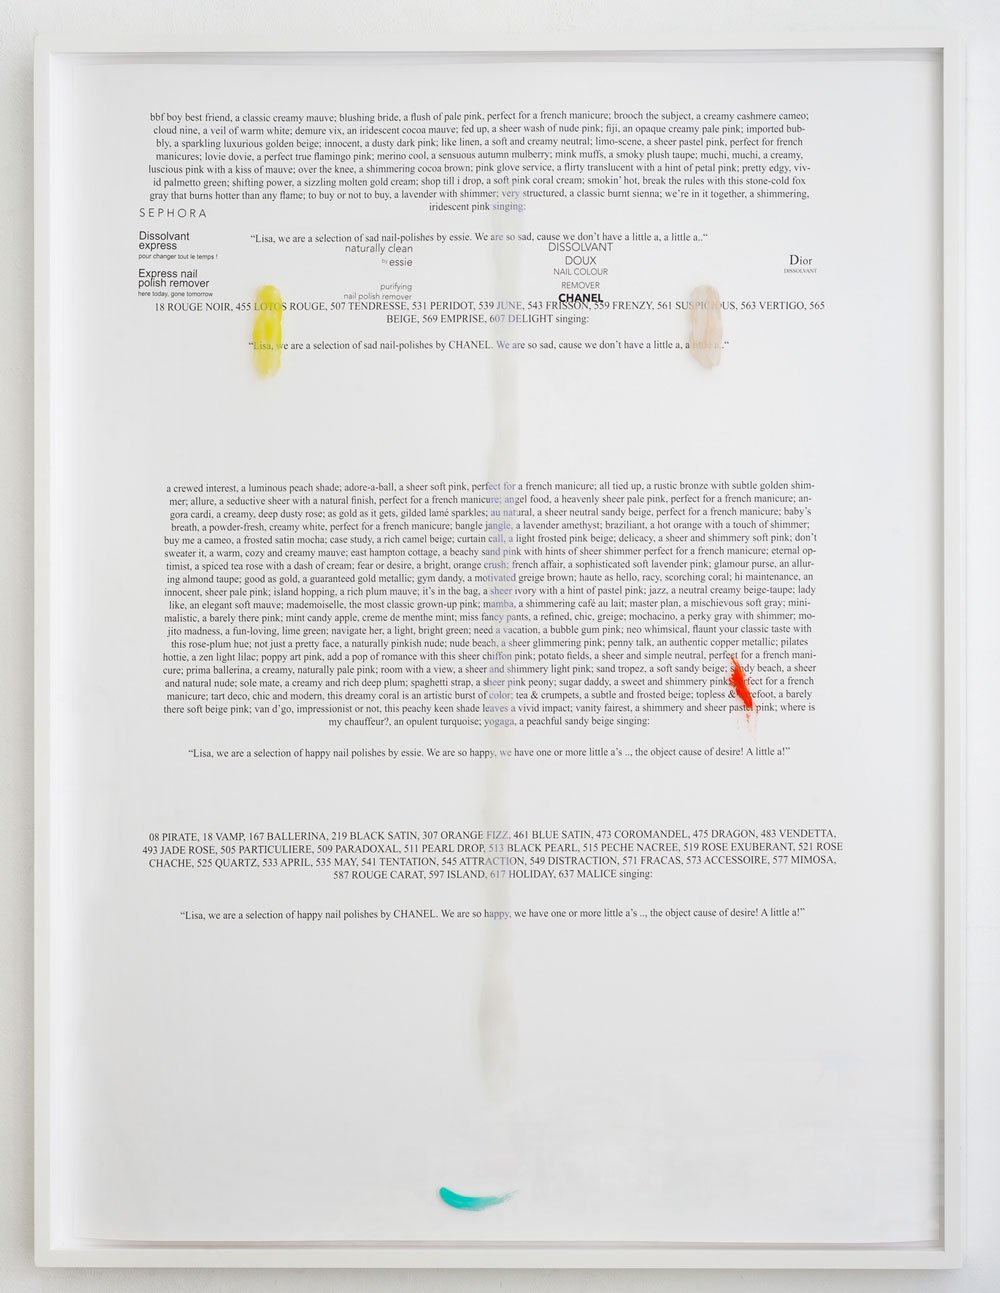 Lisa HolzerBut yes but yes, 2013Nailpolish on glass, pigment print on cotton paper88 x 68 cm